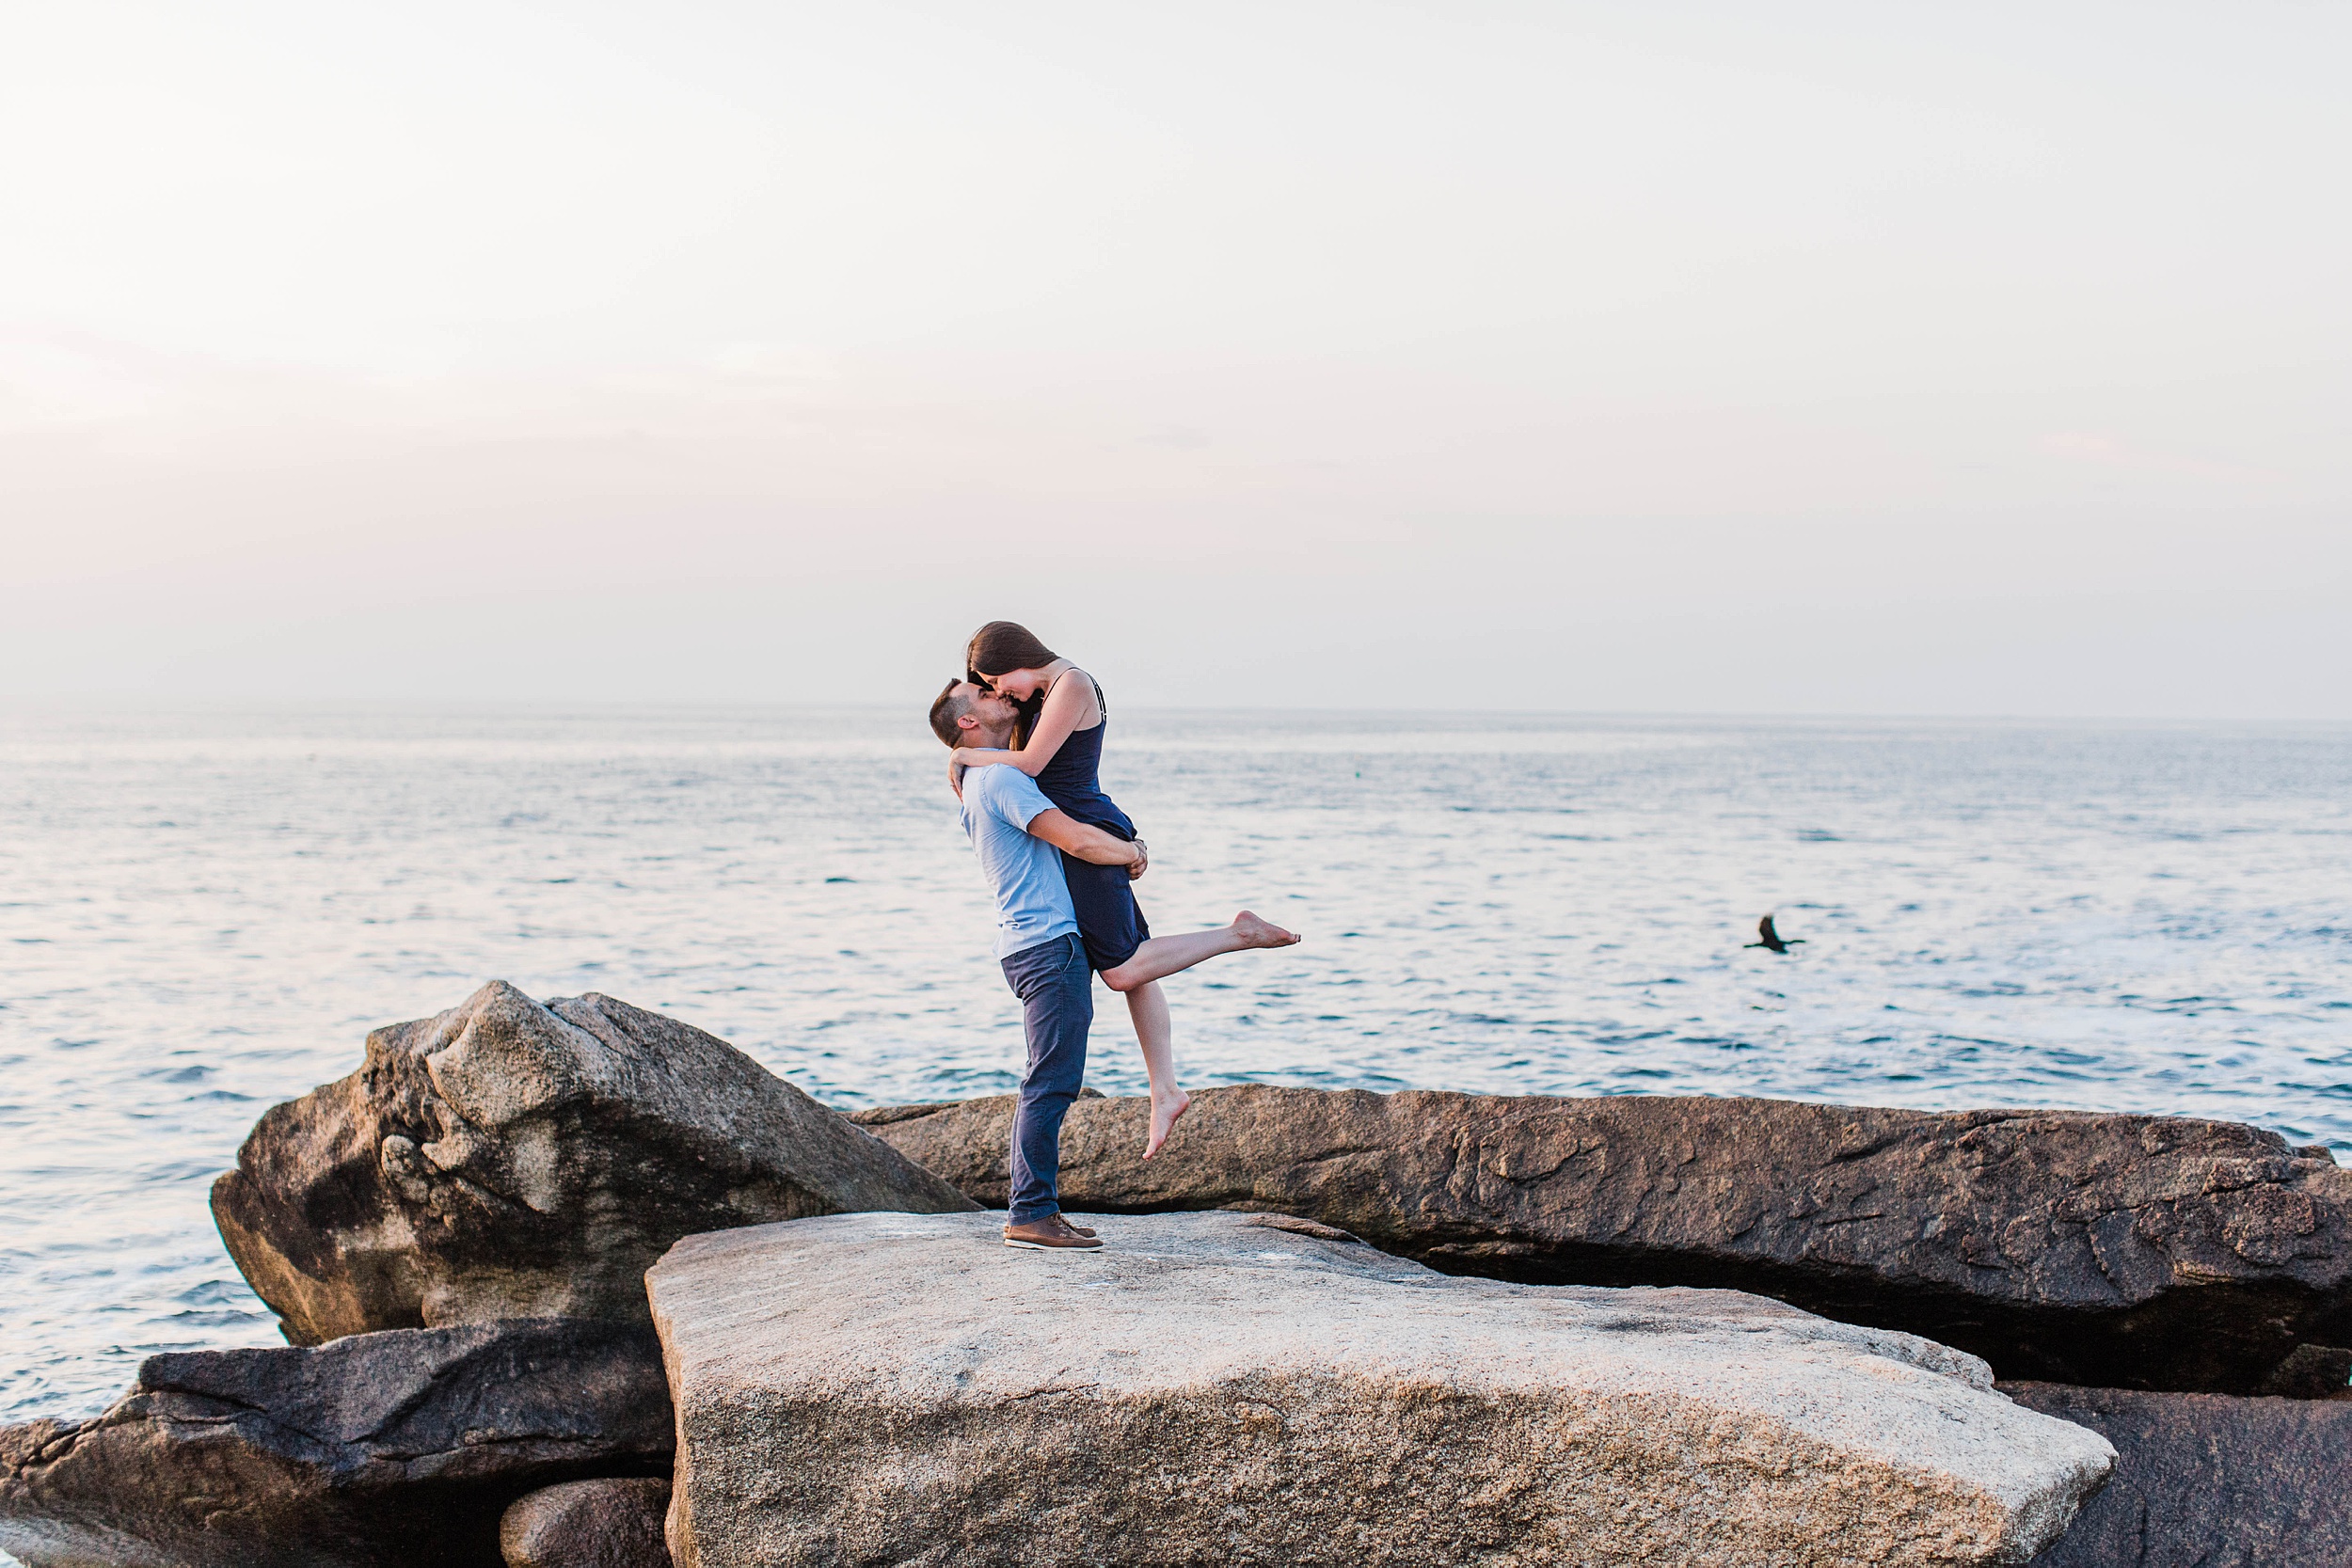 How to choose your engagement session location